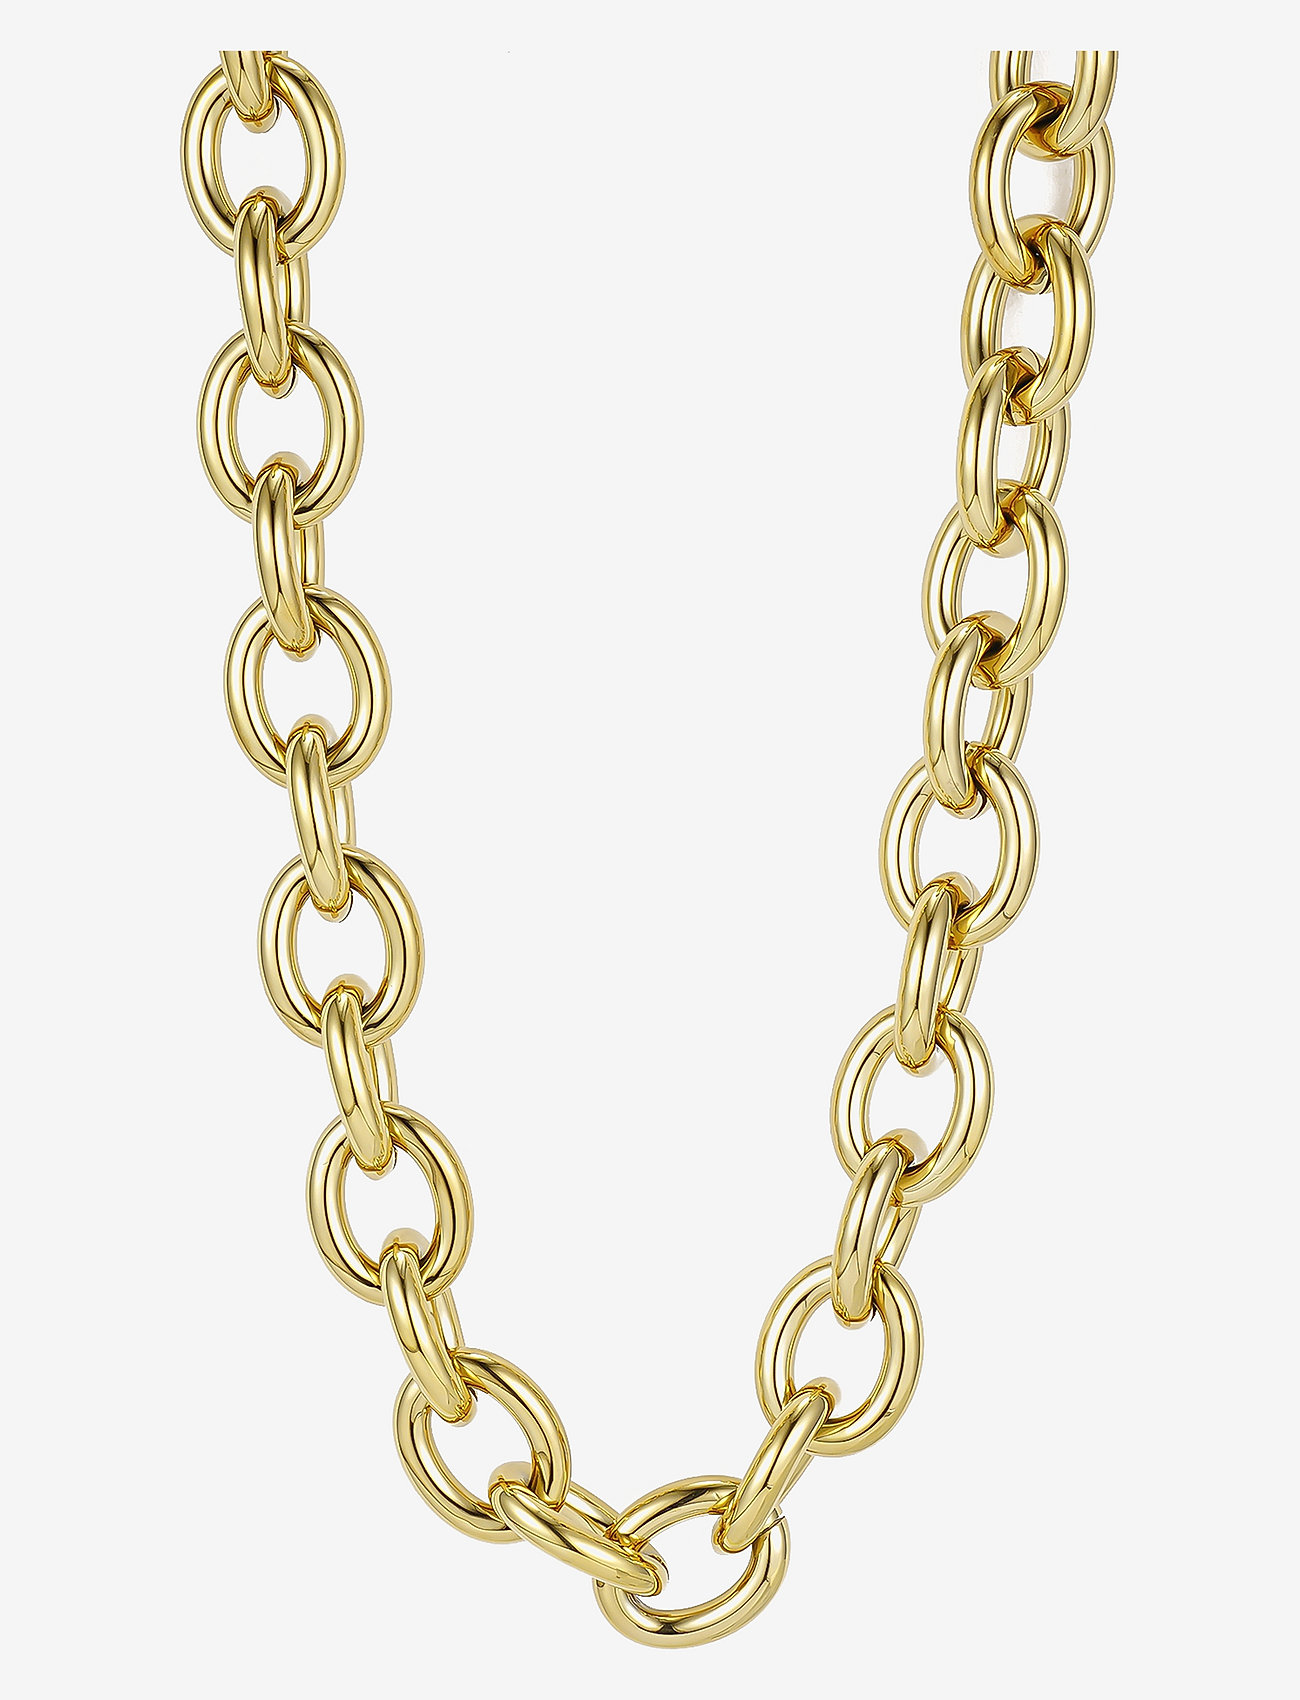 Bud to rose - Monaco Necklace Gold - chain necklaces - gold - 0